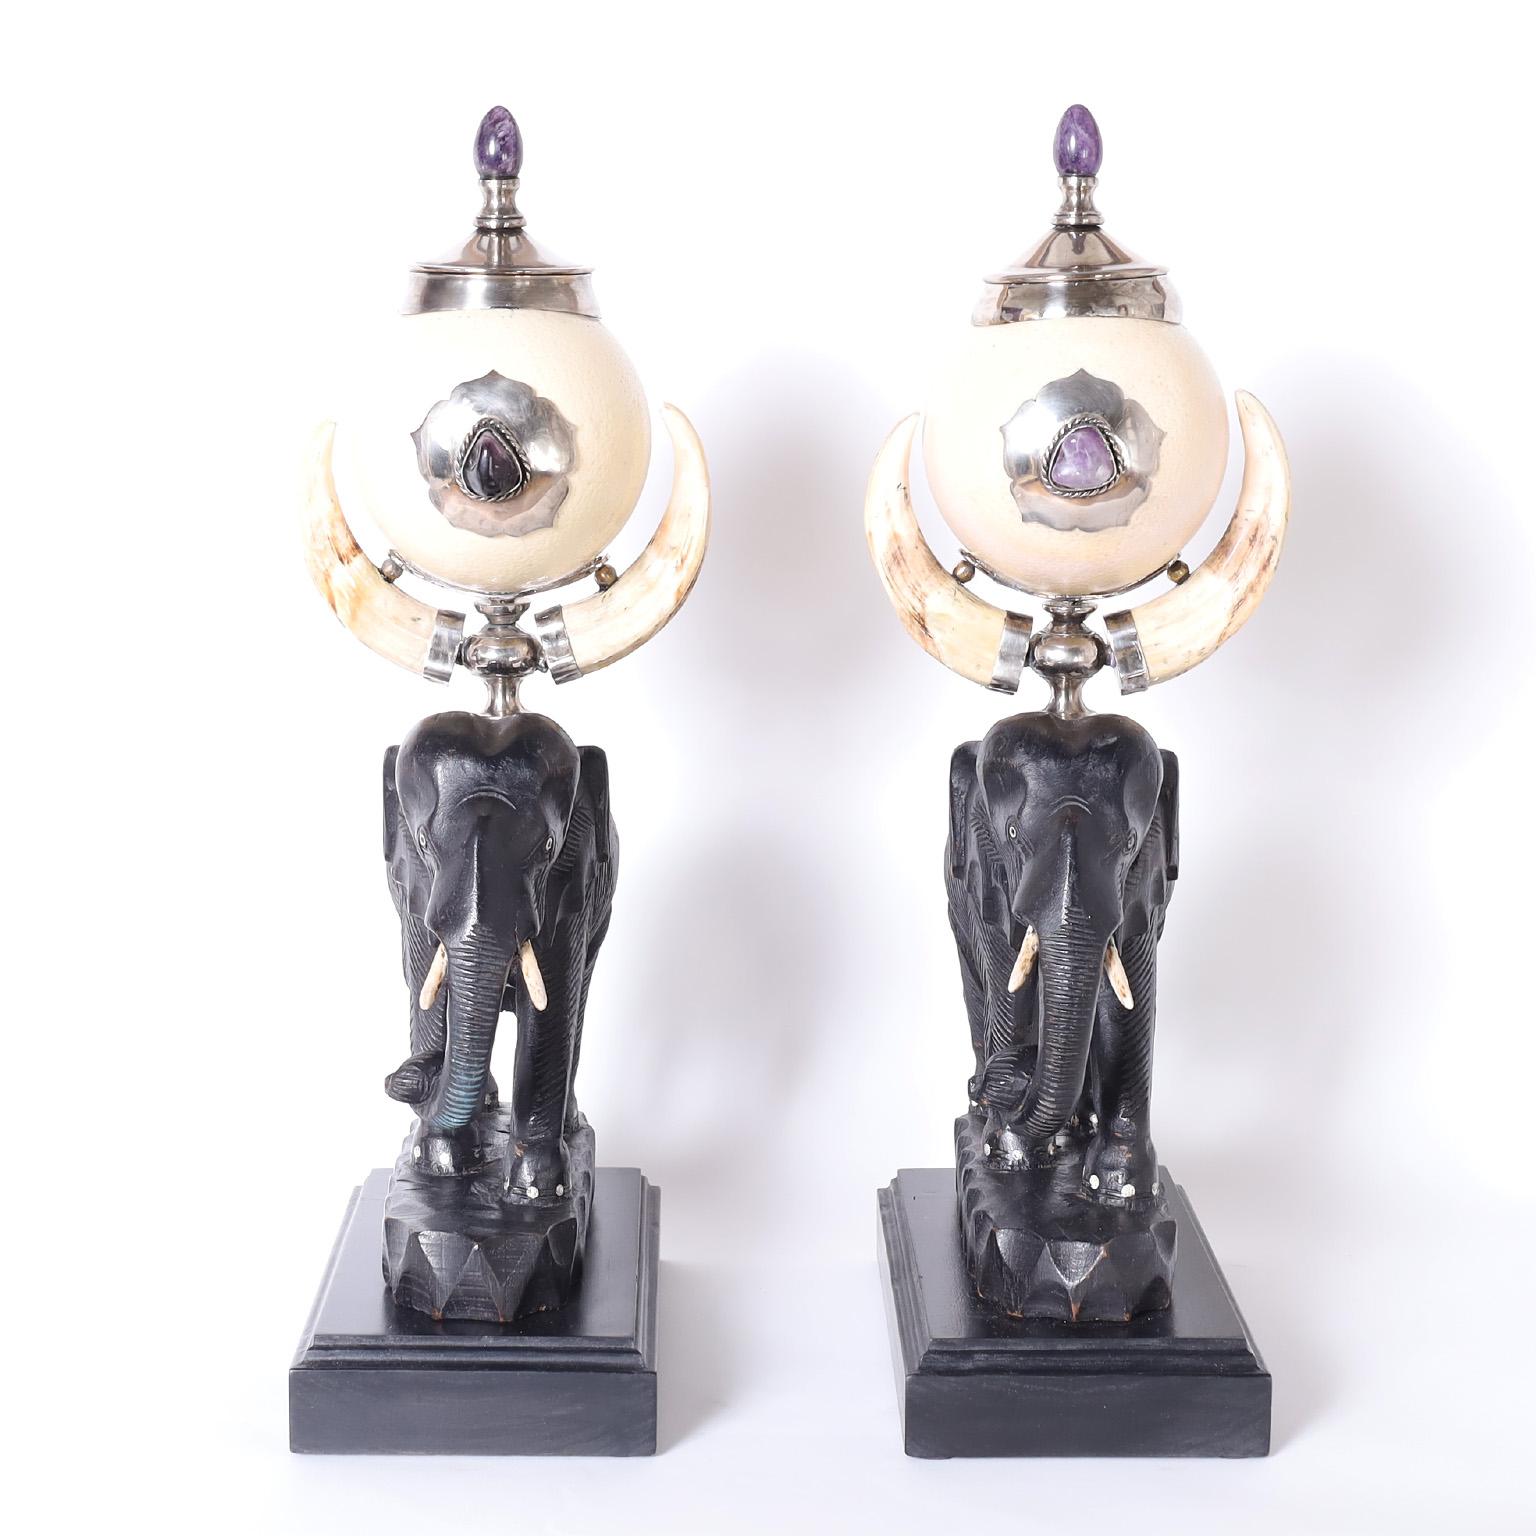 Mid-century pair of Anthony Redmile urns crafted with an eccentric array of materials featuring amethyst stone, ostrich eggs, boar tusks and carved ebony all in a dramatic composition of form and function. Signed 